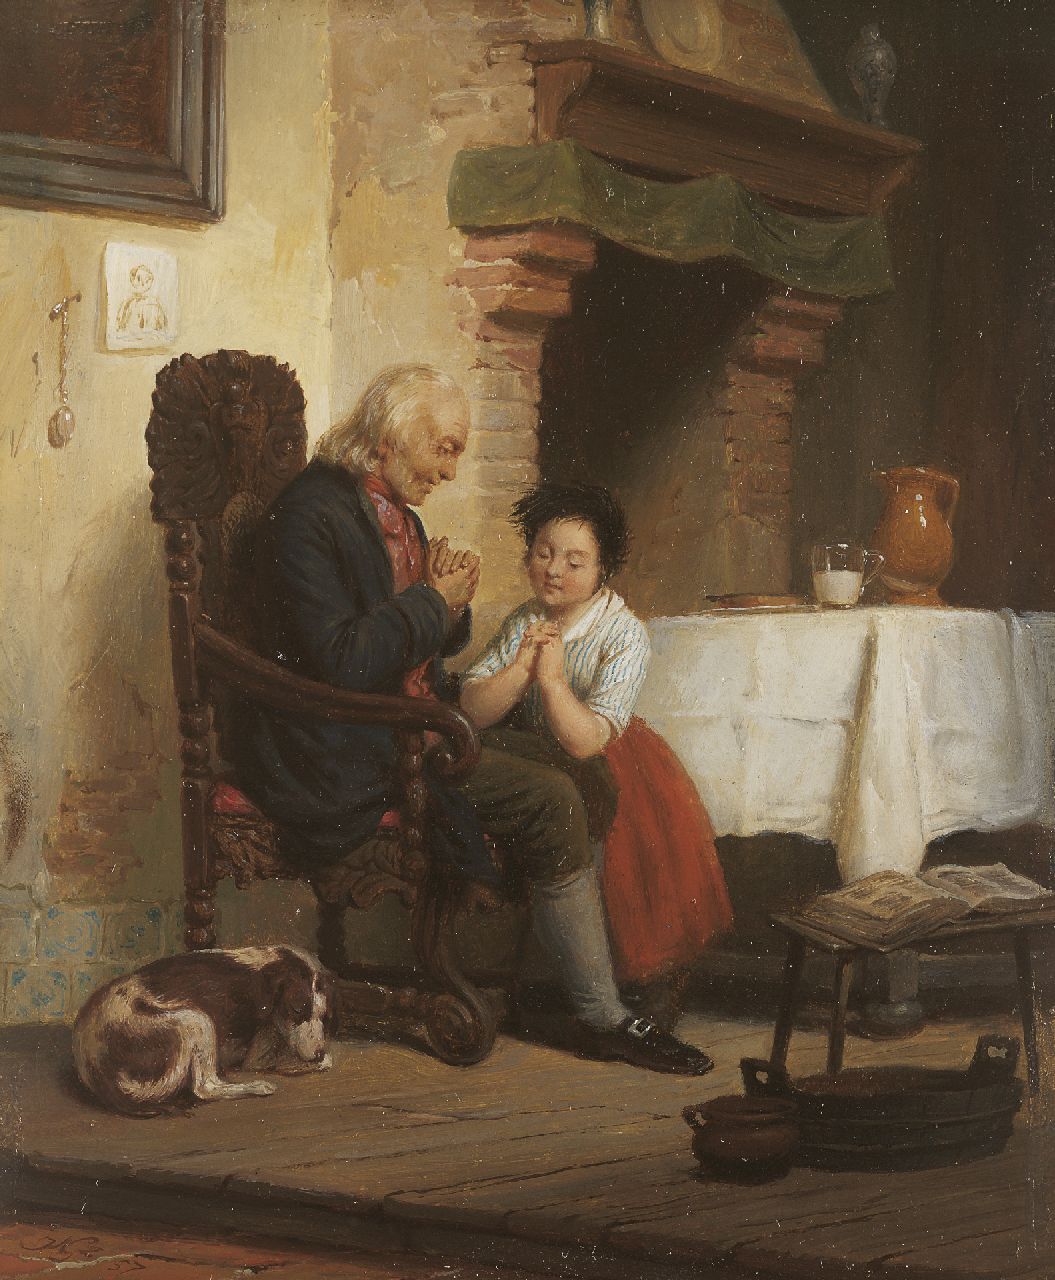 Scheerboom A.  | Andries Scheerboom, Praying together, oil on panel 20.5 x 17.0 cm, signed l.o. with vague monogram and painted '57